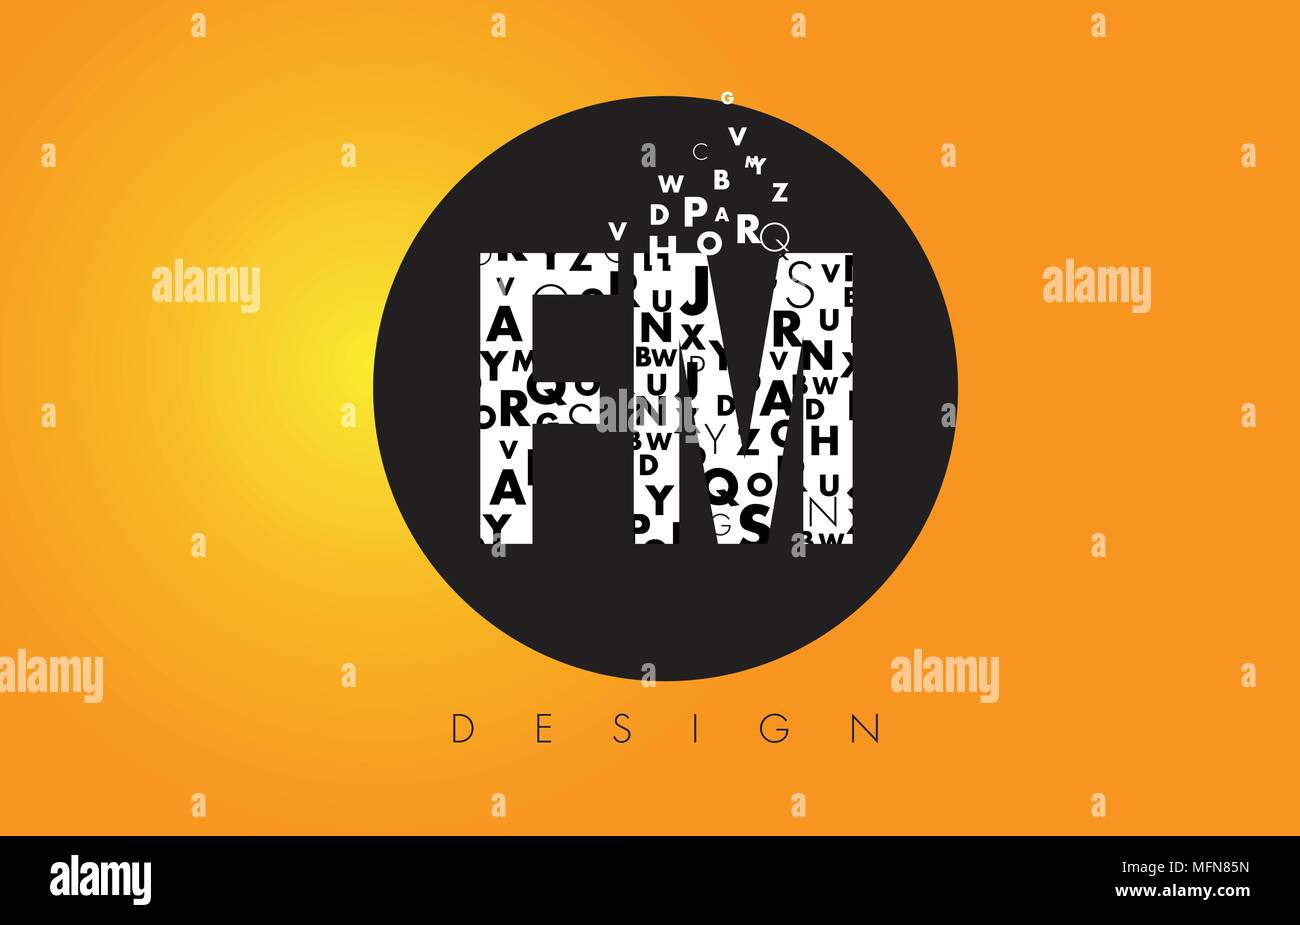 FM F M Logo Design Made of Small Letters with Black Circle and Yellow Background. Stock Vector